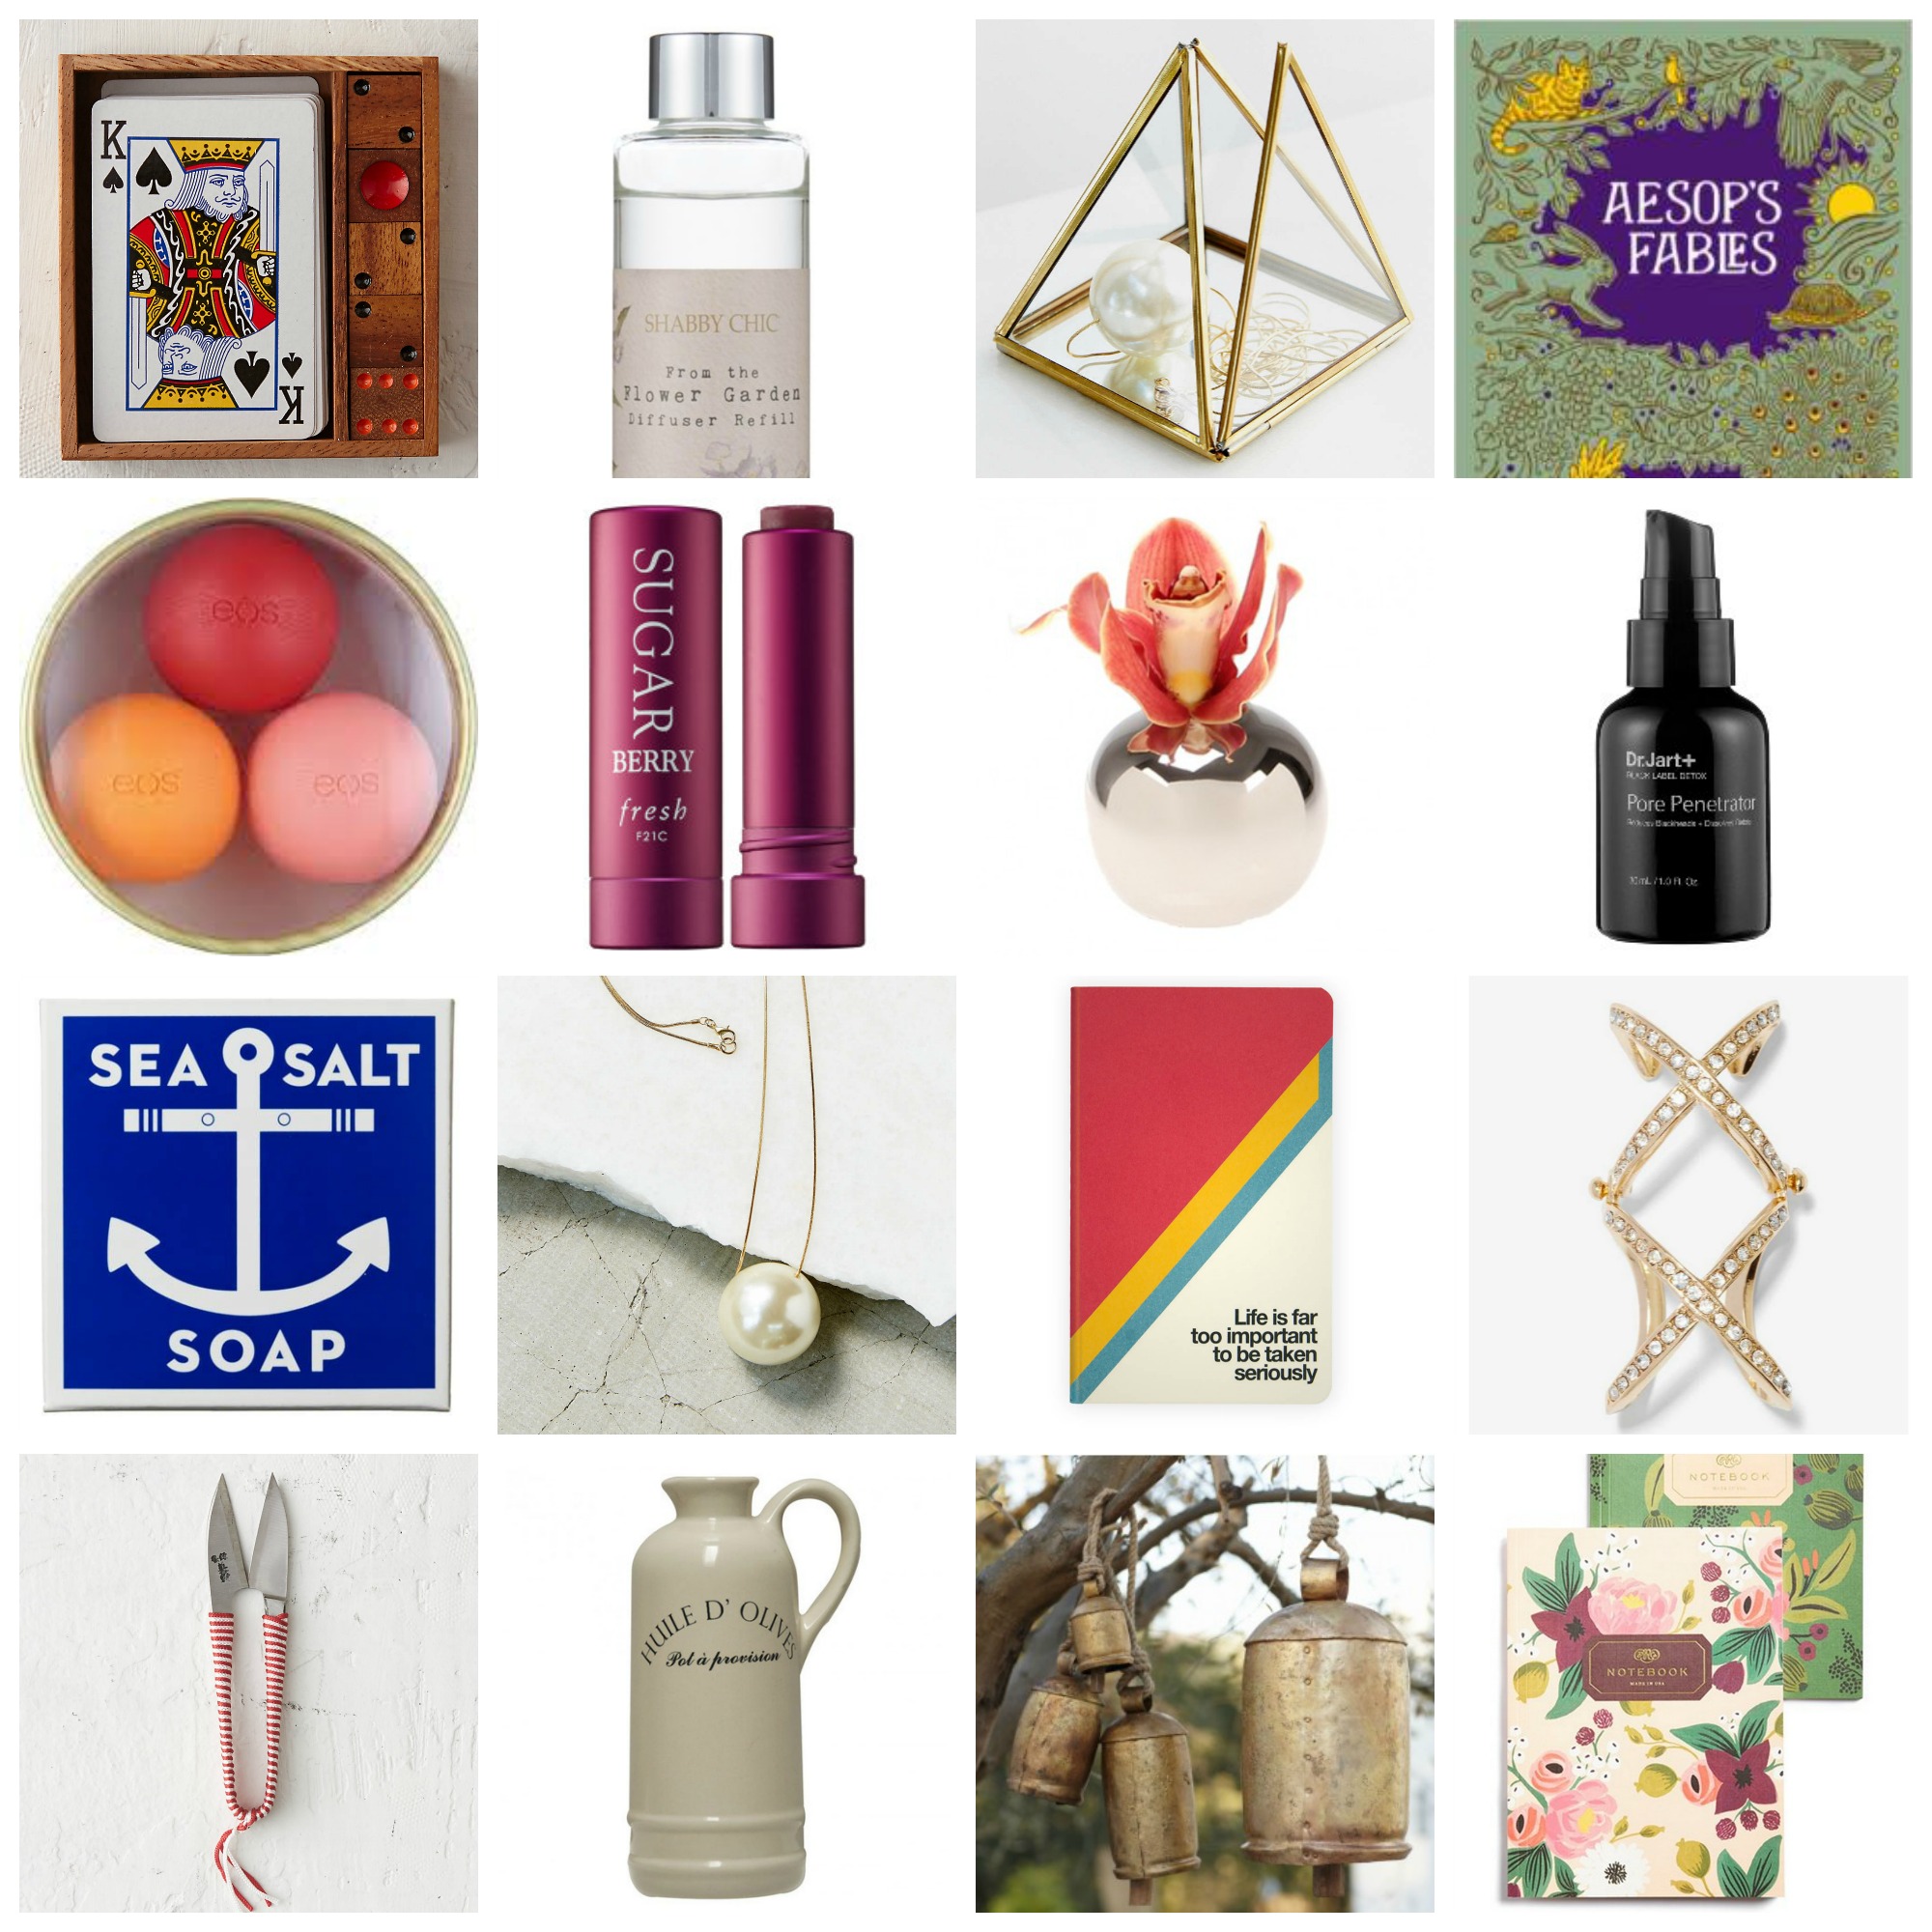 25 Gift Ideas Under $25 - The Last Minute Gift guide